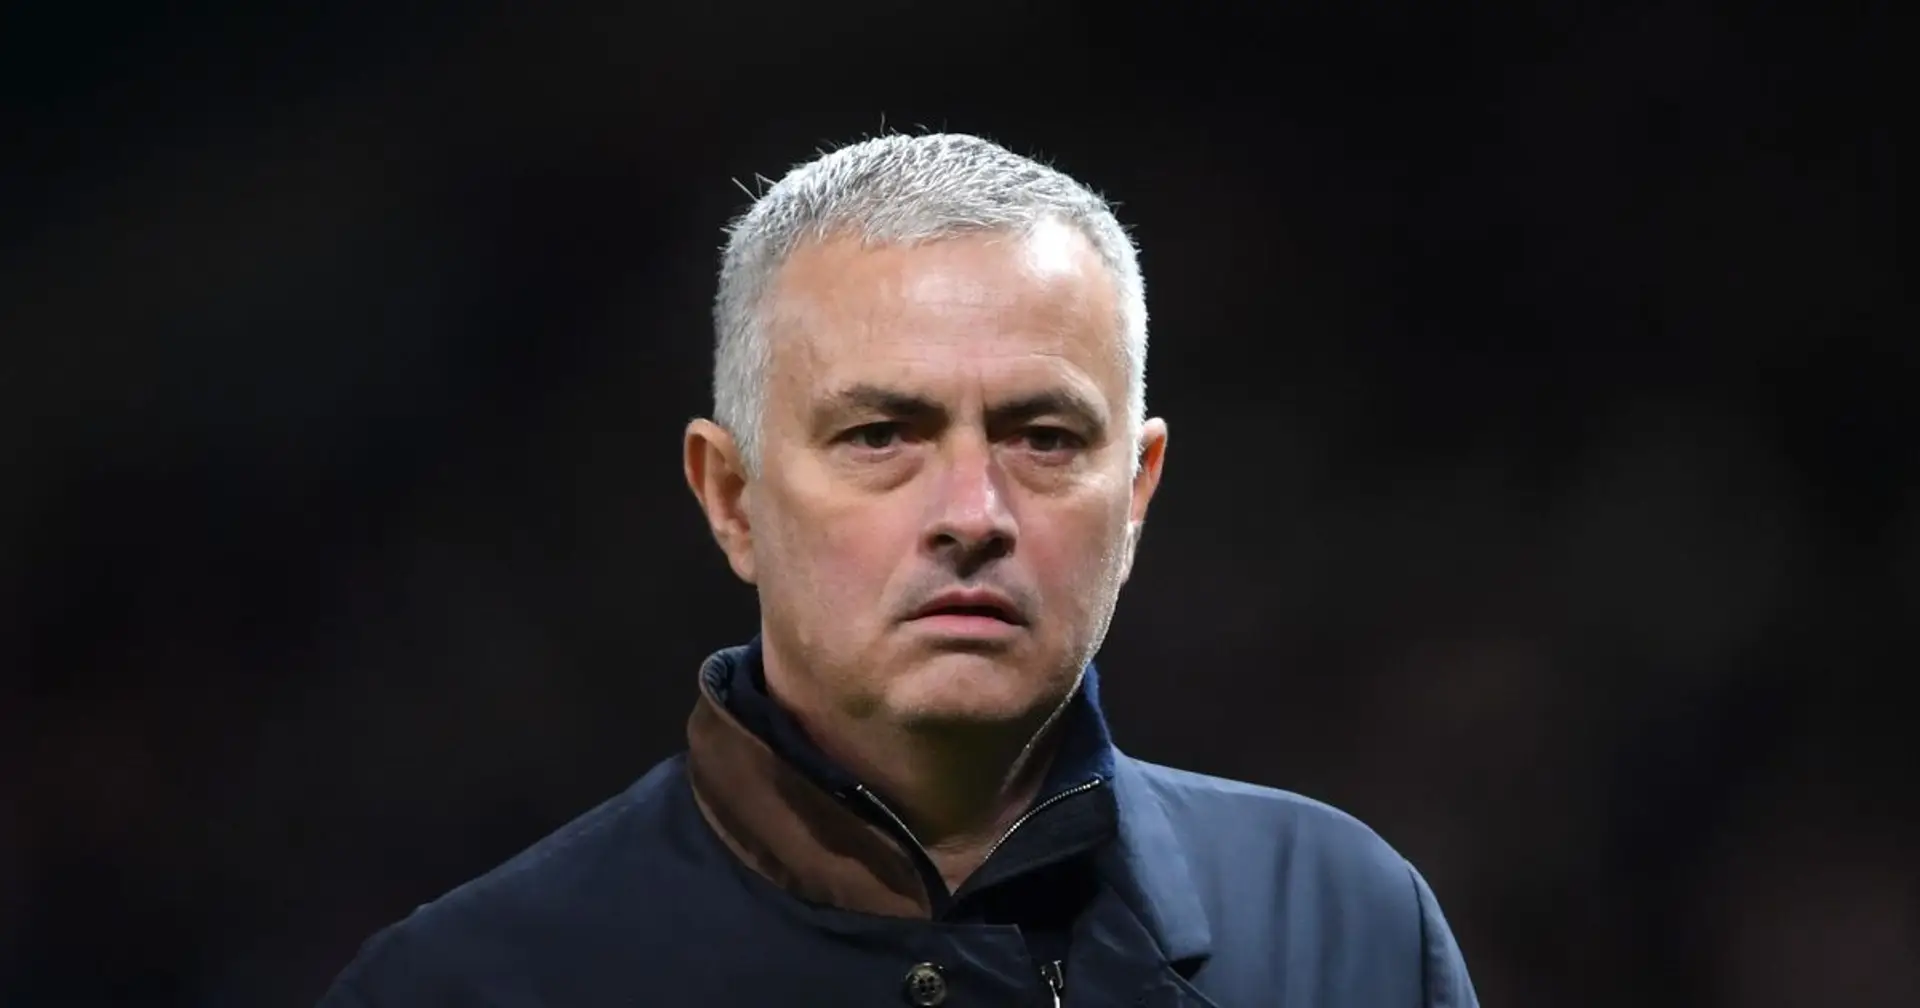 Jose Mourinho warns Man United that Tottenham will 'fight' for points on Friday